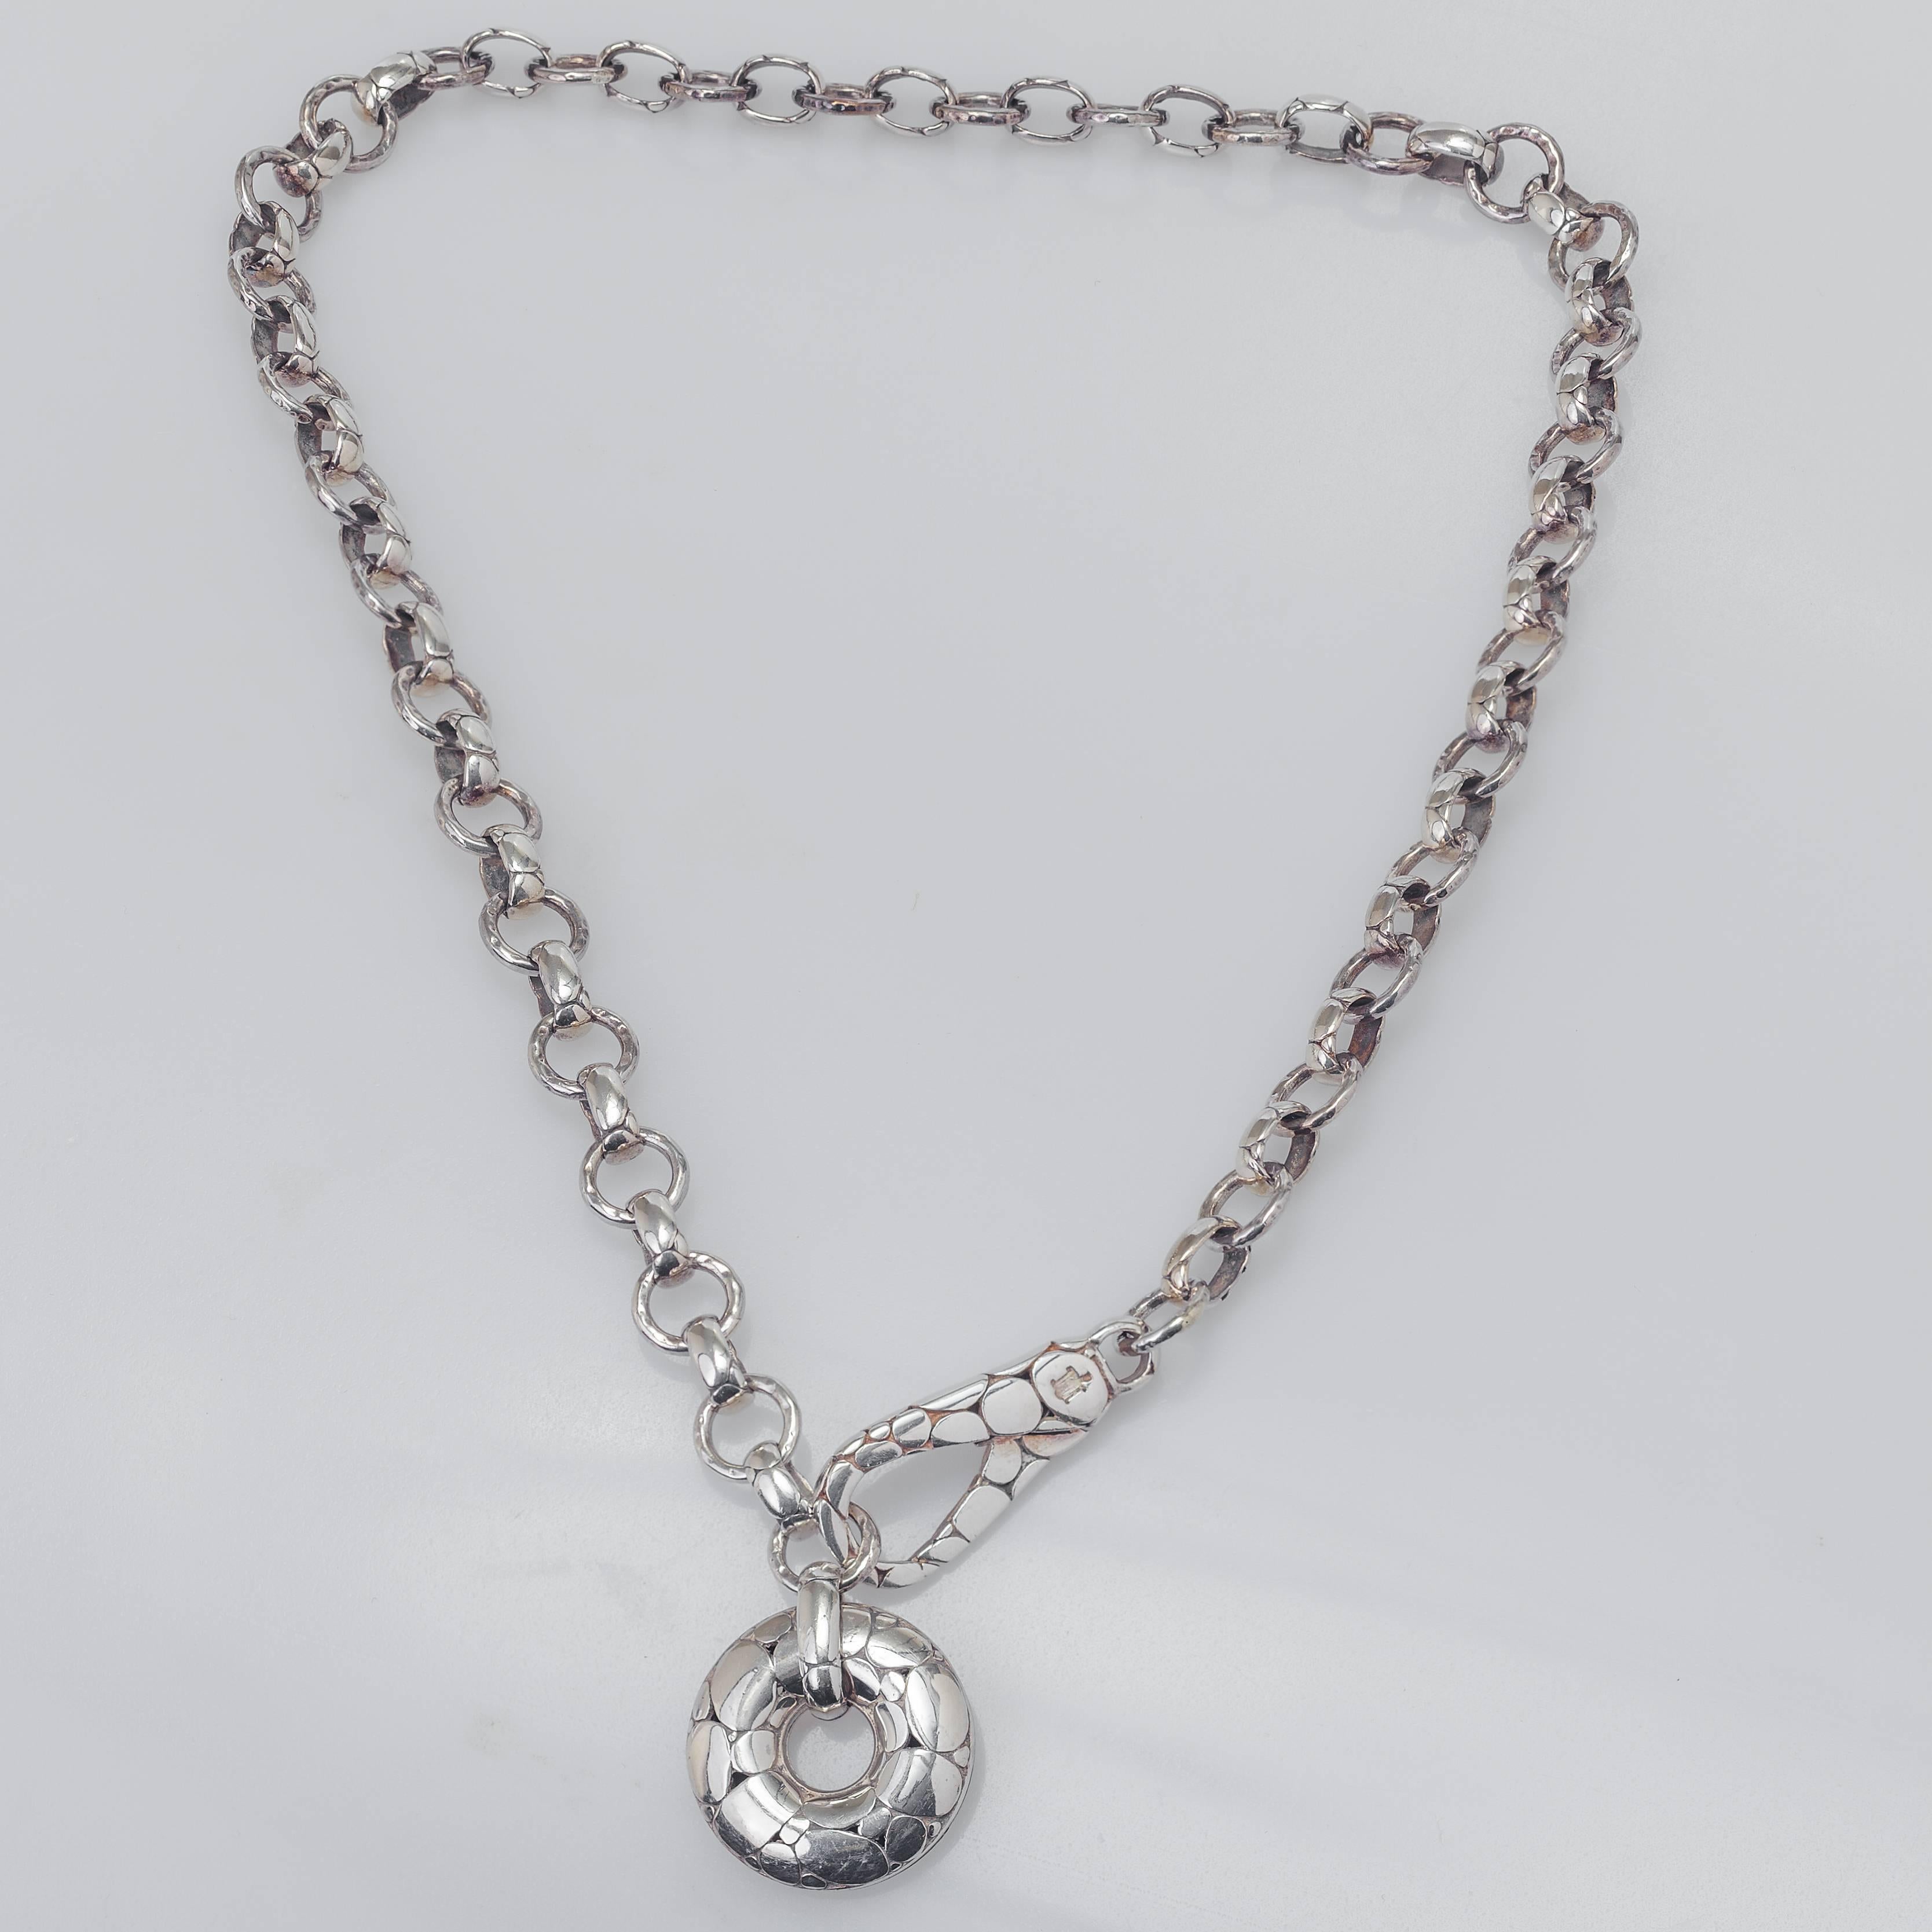 This 18 inch necklace is in excellent condition. It has a few light scratches from being stored. 